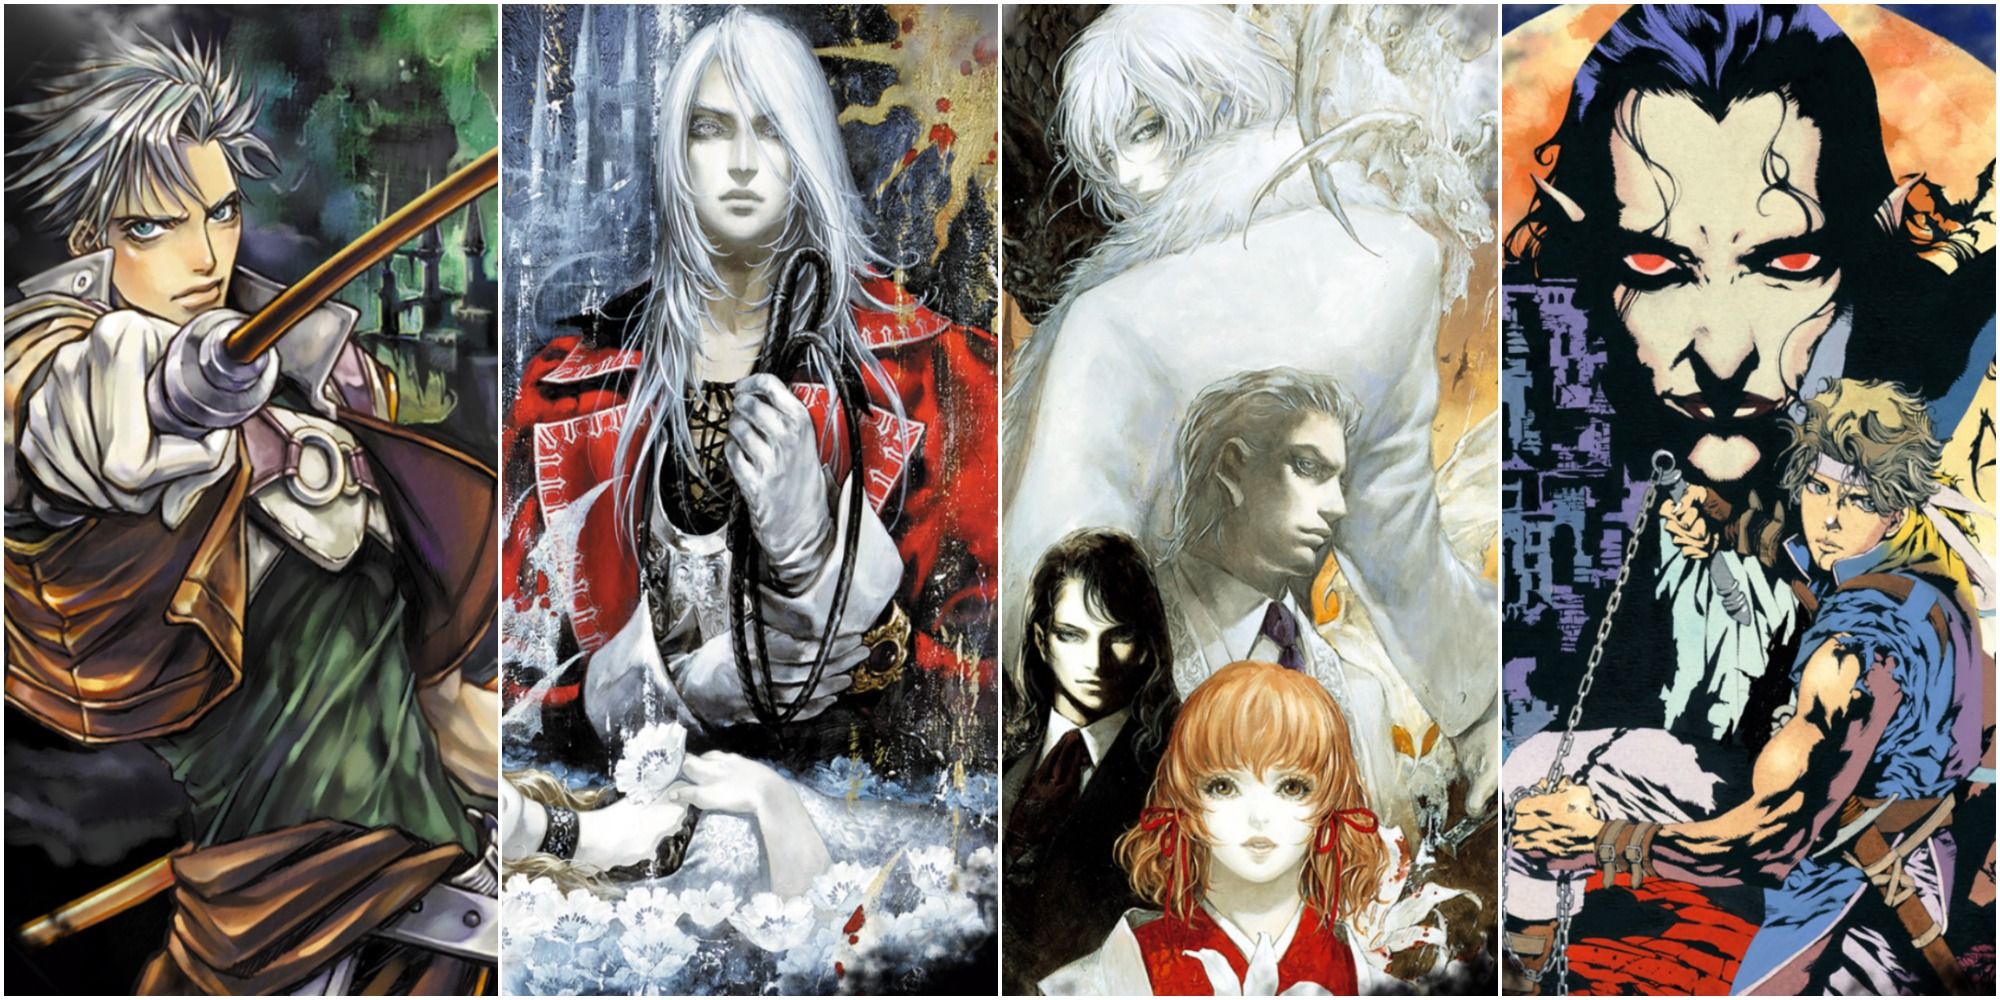 Castlevania Advance Collection Artwork for Circle of the Moon, Harmony of Dissonance, Aria of Sorrow and Vampire's Kiss